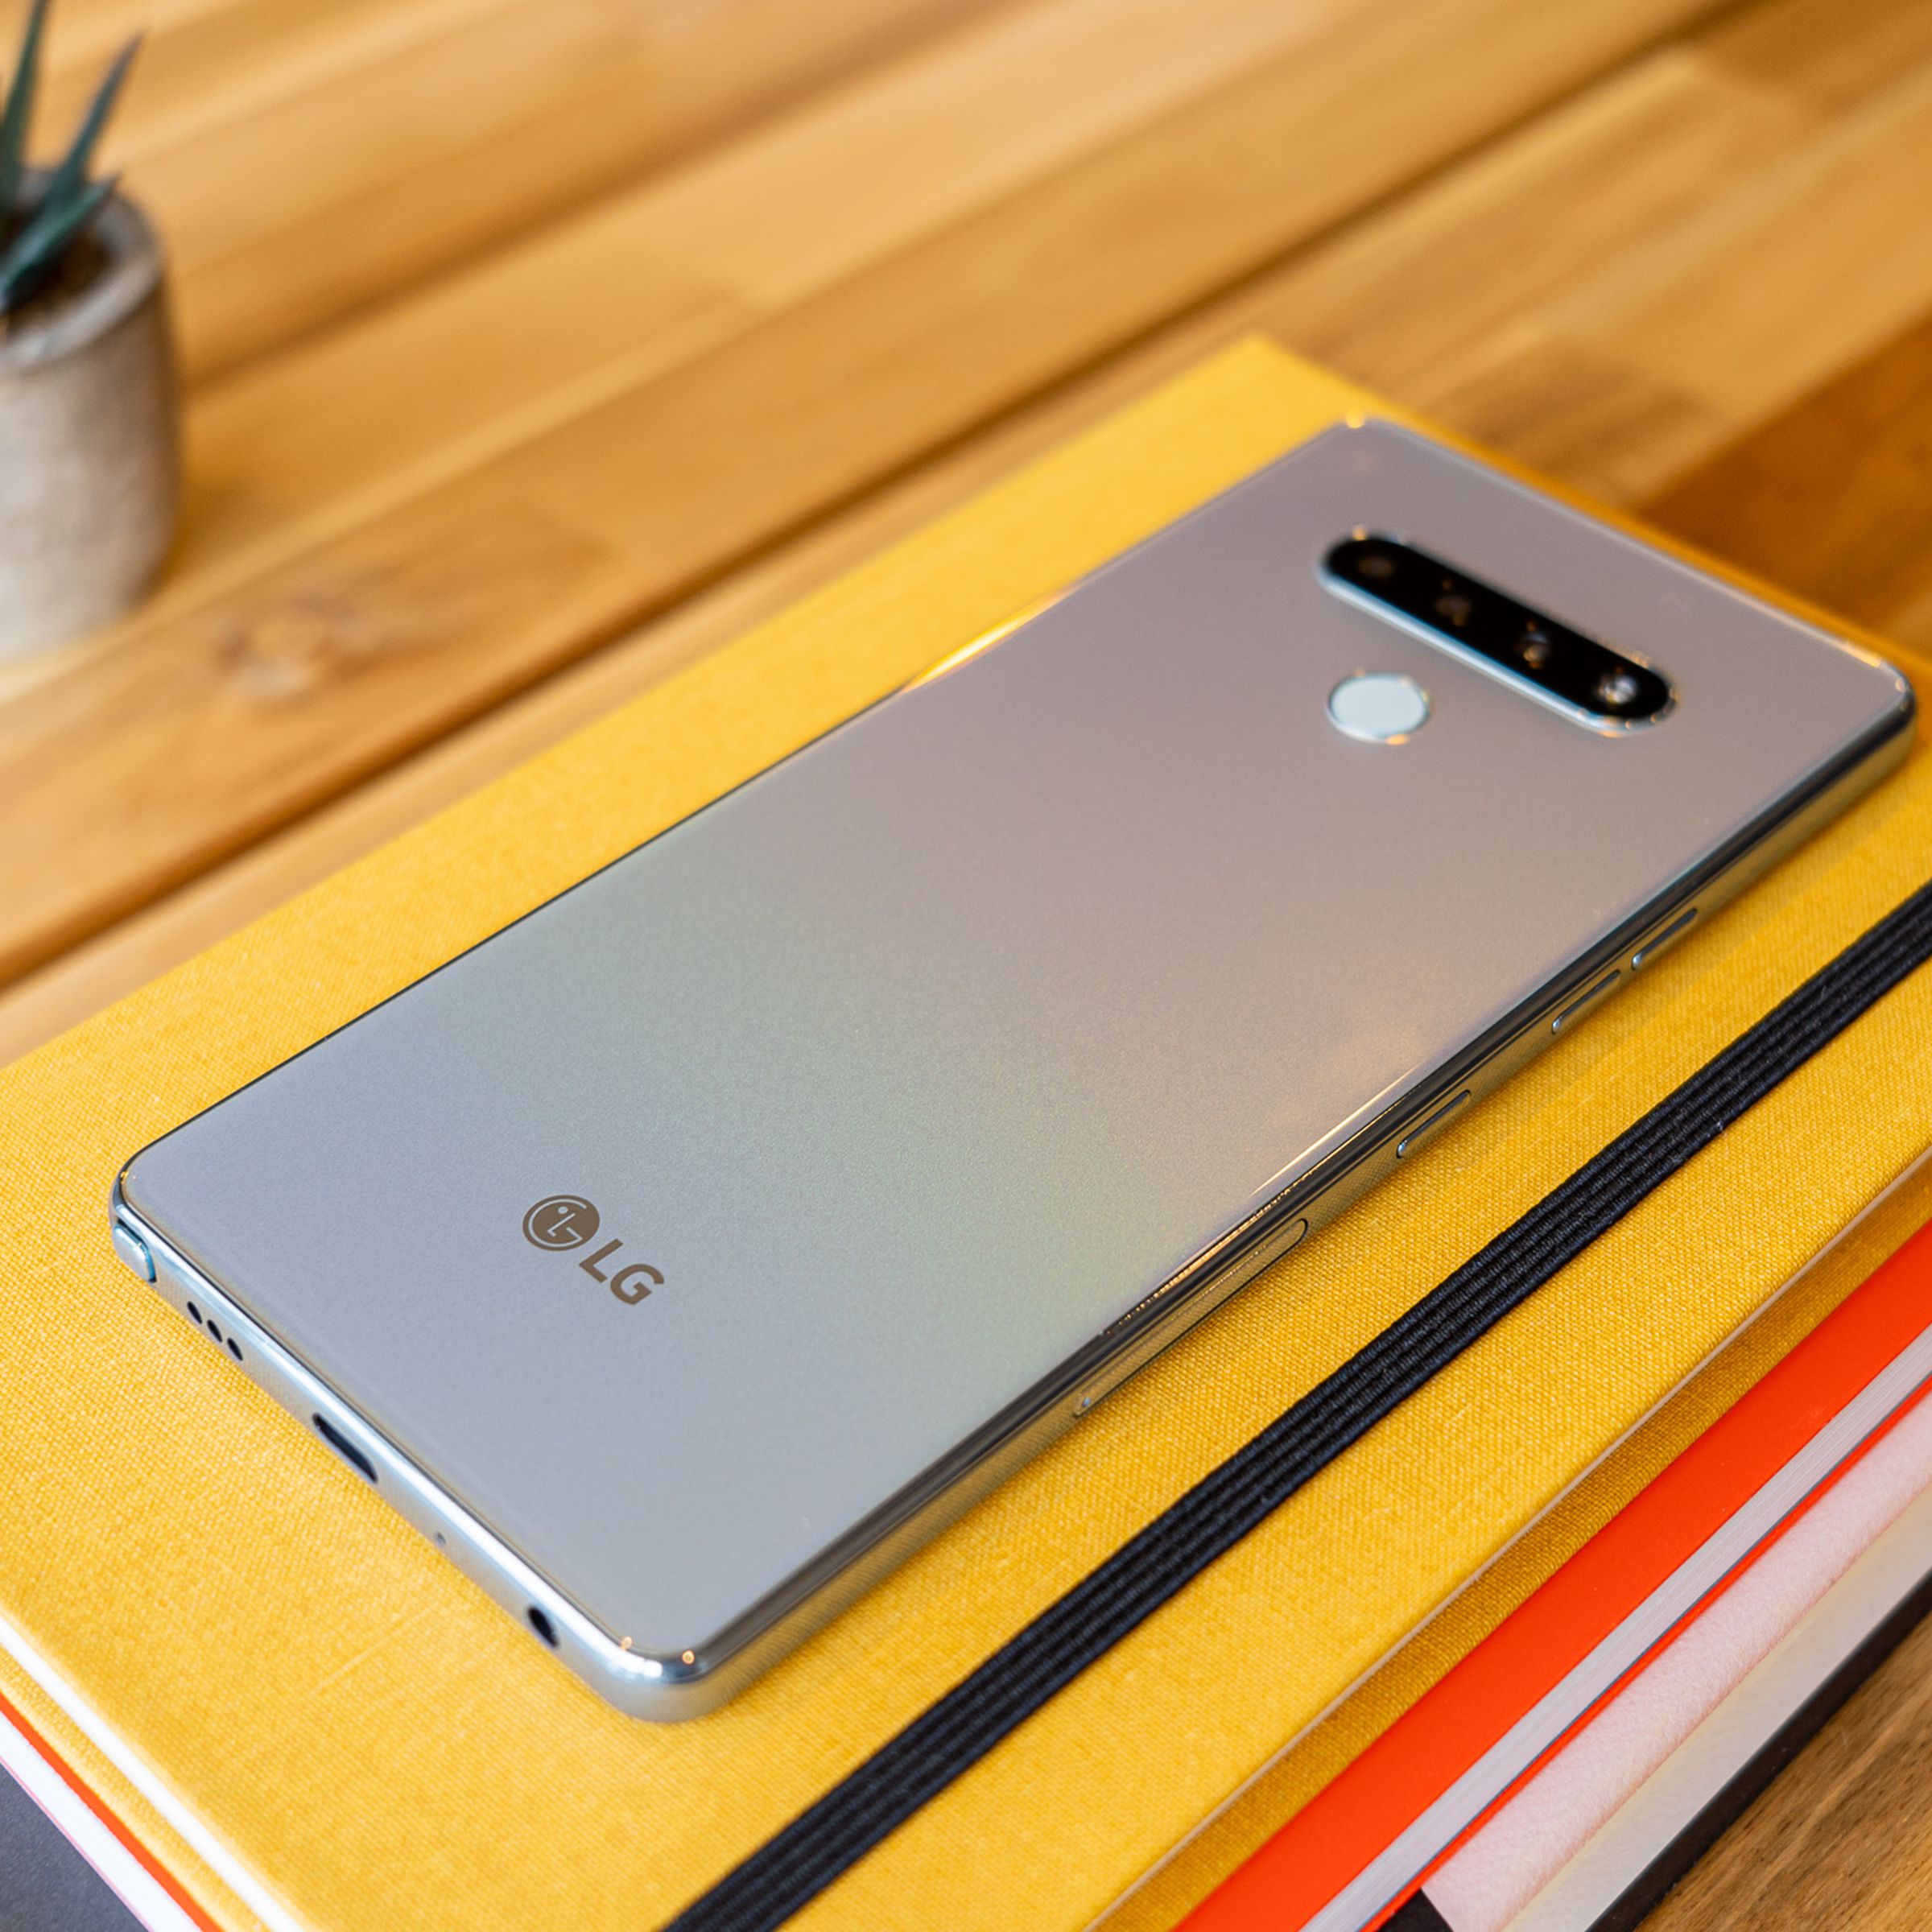 The LG Stylo 6 is one of the company’s bestselling phones in recent history.